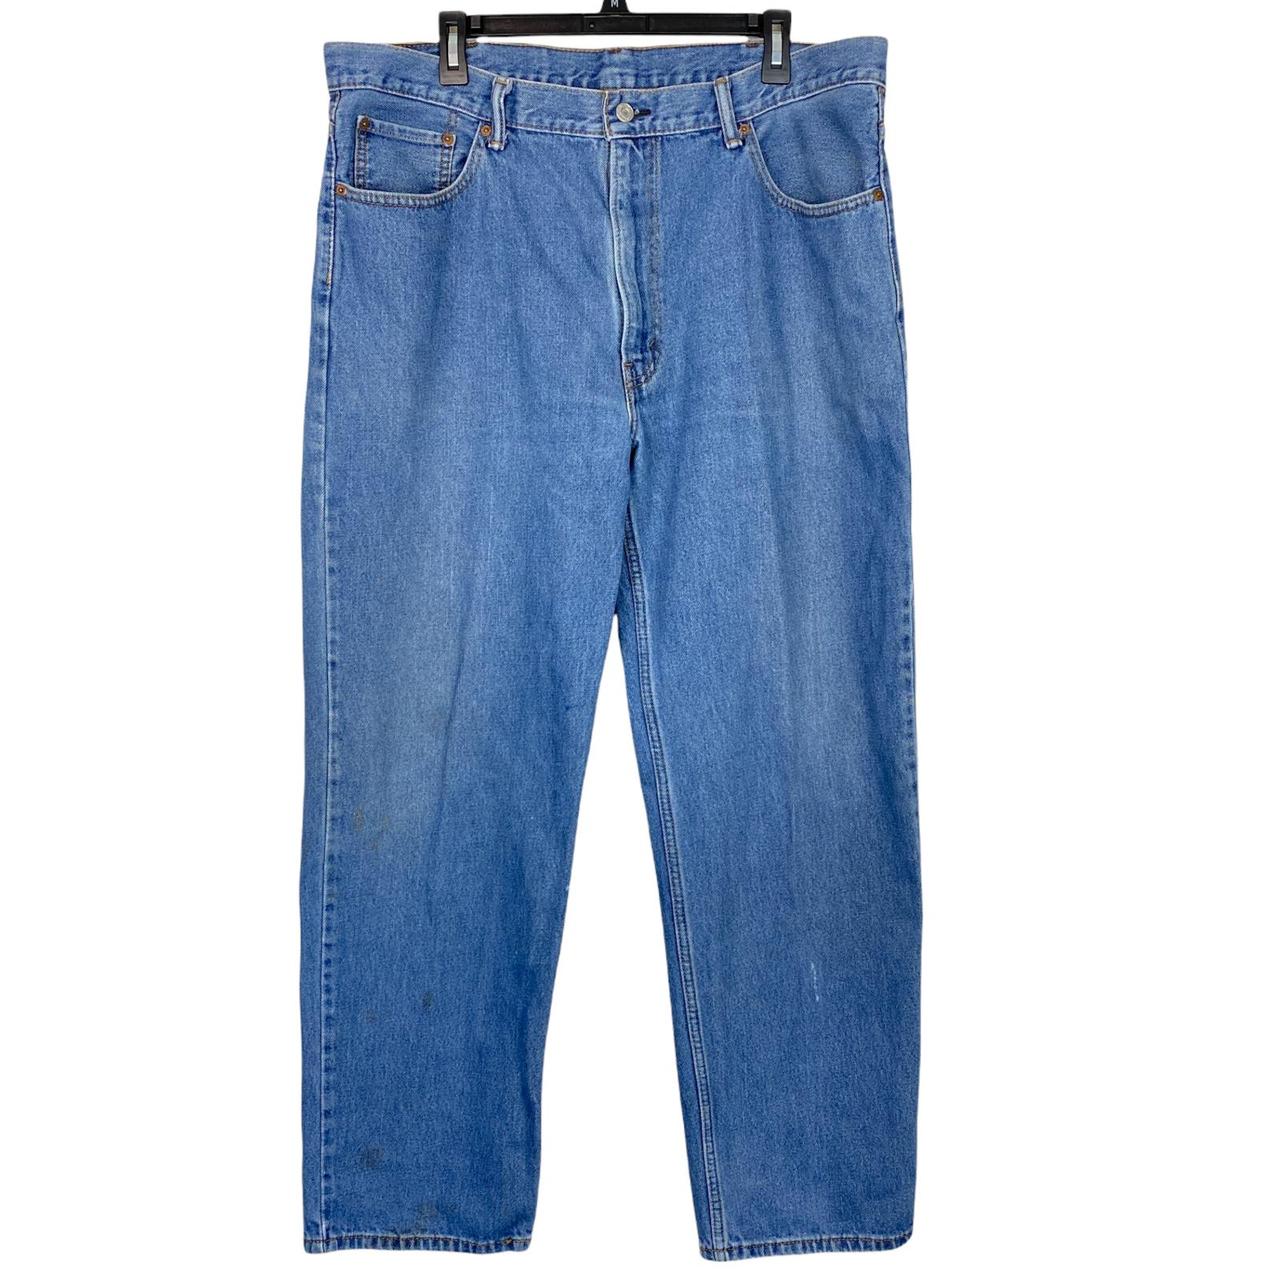 Product Image 1 - Levis 550 Relaxed Fit Tapered